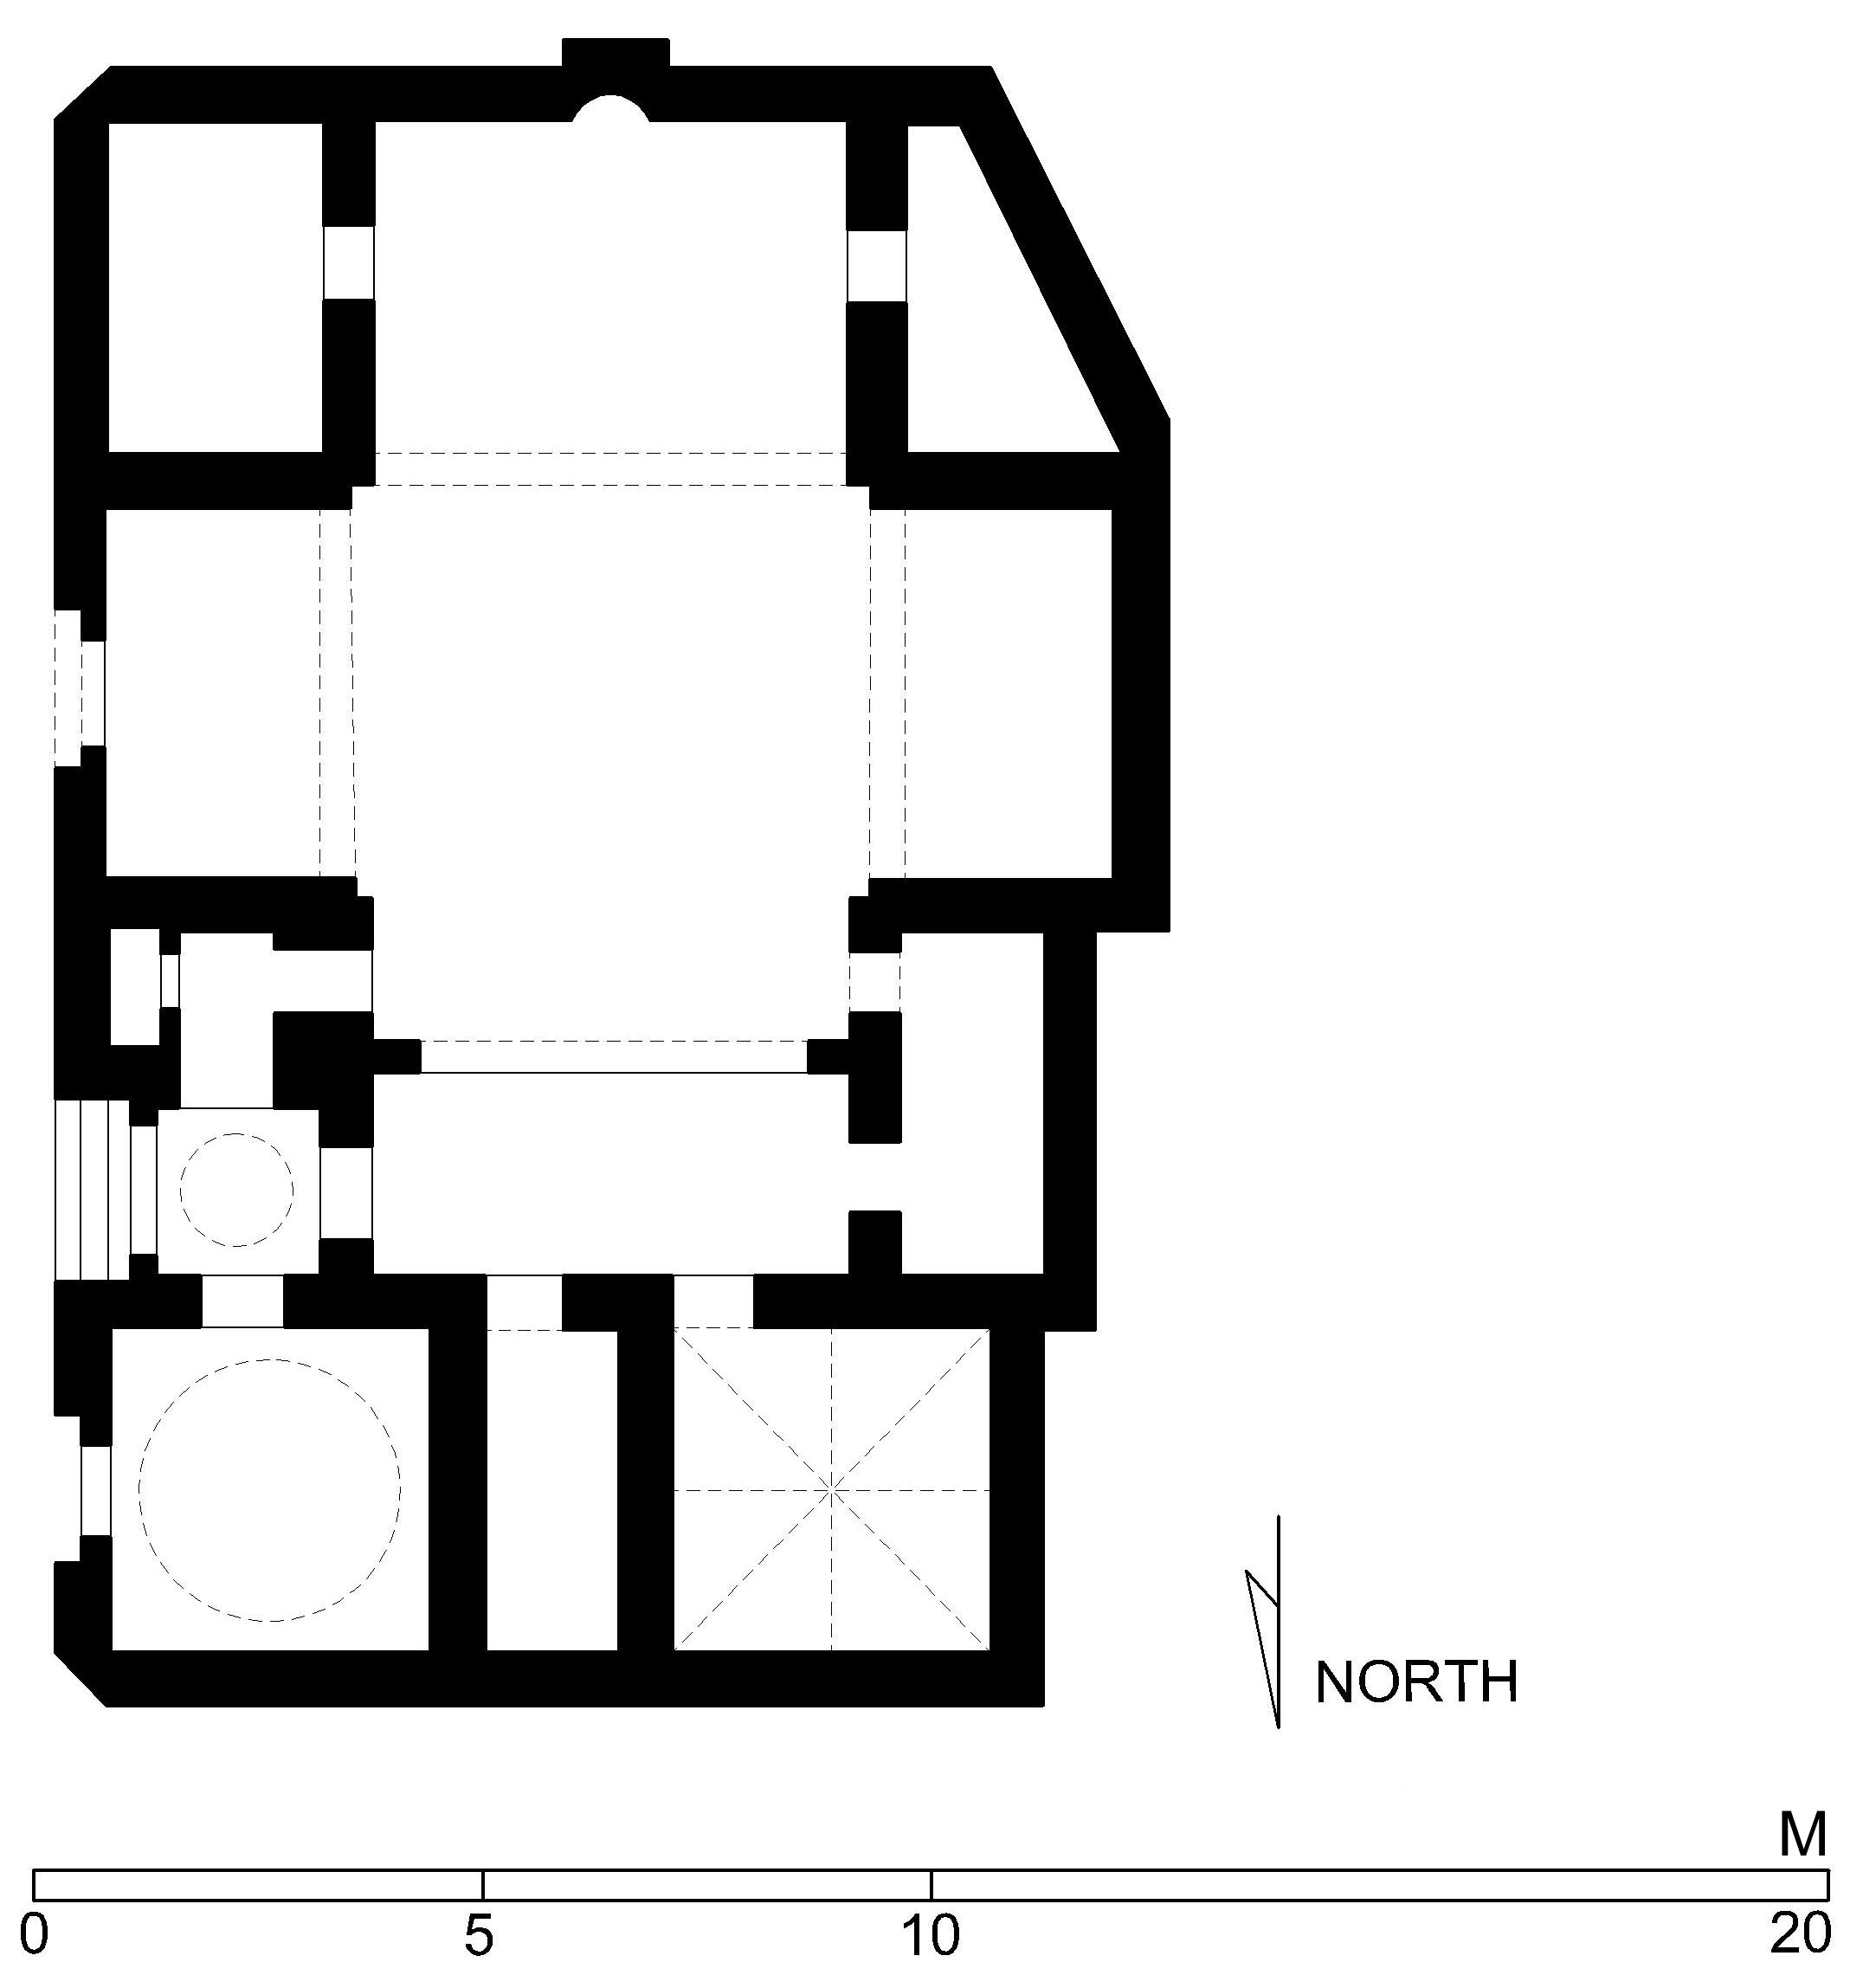 Madrasa wa-Turba Afridun al-'Ajami - Floor plan of funerary madrasa (after Meinecke) in AutoCAD 2000 format. Click the download button to download a zipped file containing the .dwg file. 